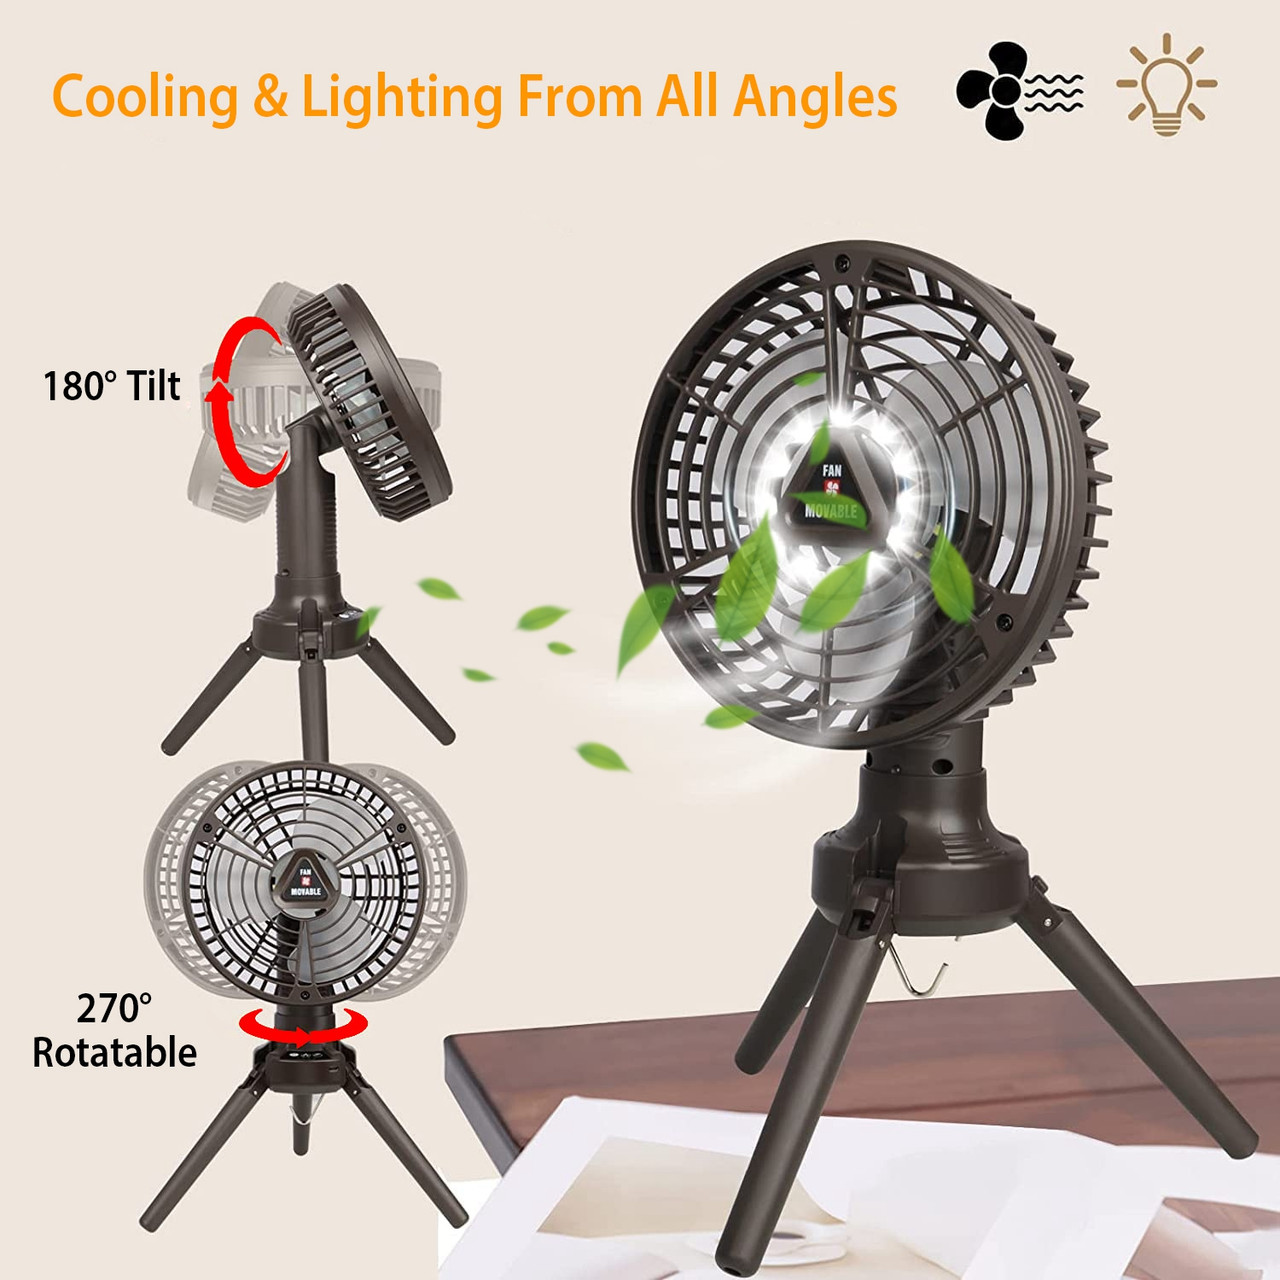 Portable Camping Fan by LakeForest® product image